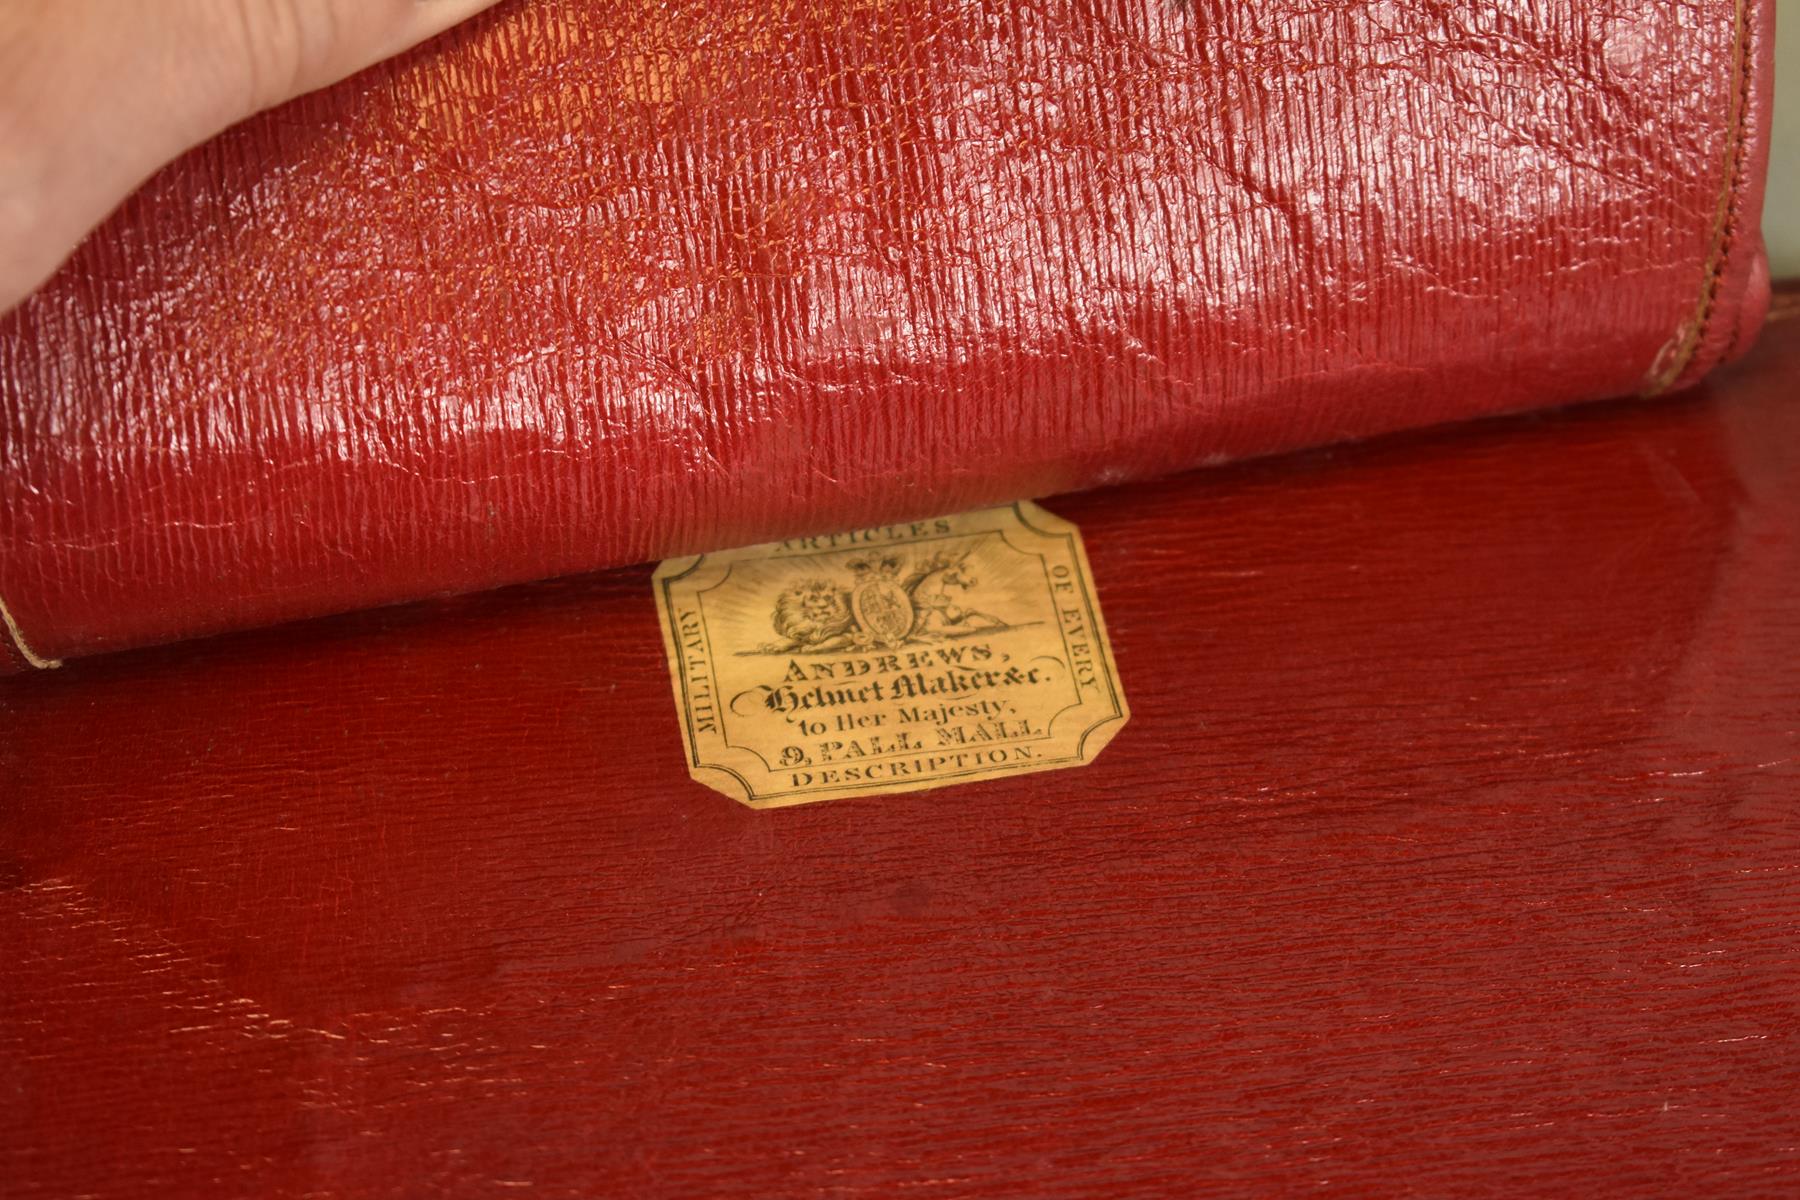 A FINE LARGE SIZE WILLIAM IV 15TH KING'S HUSSARS OFFICER'S SABRETACHE, the red felt flap with - Image 10 of 10